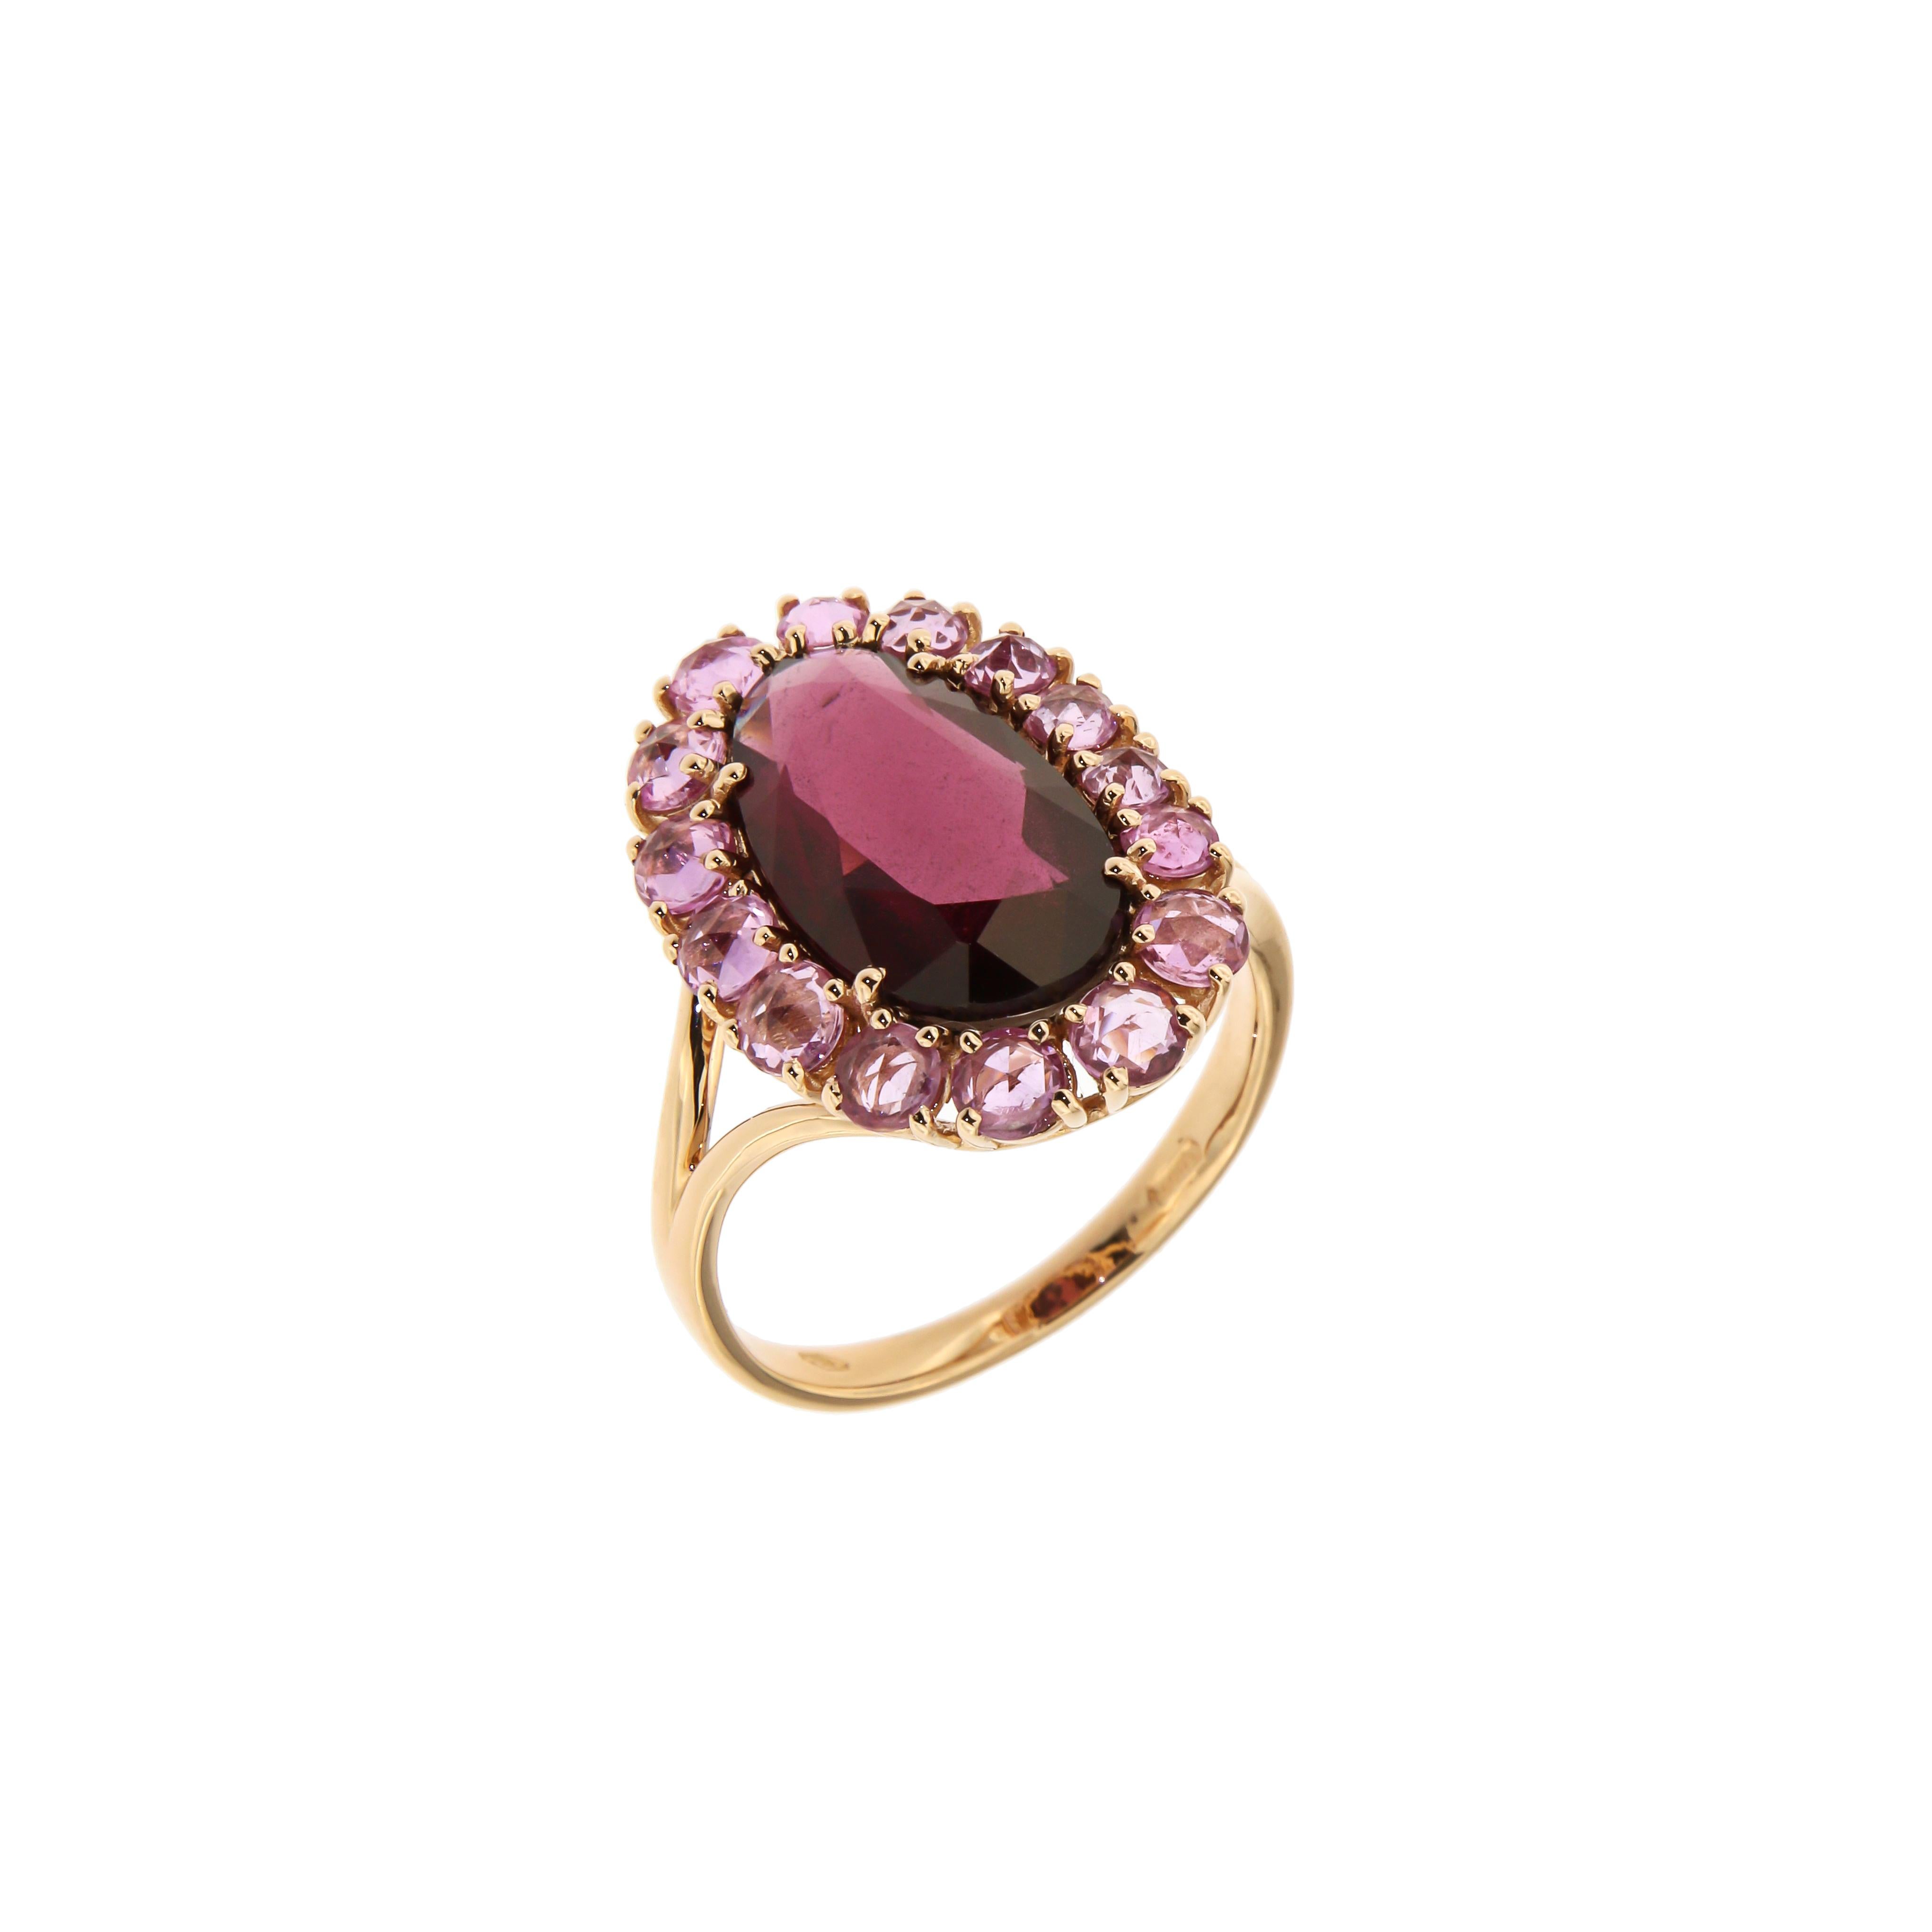 Ring Rose Gold 18 K
Rhodolite 6,04 ct
Pink Sapphire

Weight 5 grams
Different Sizes Available 

With a heritage of ancient fine Swiss jewelry traditions, NATKINA is a Geneva based jewellery brand, which creates modern jewellery masterpieces suitable